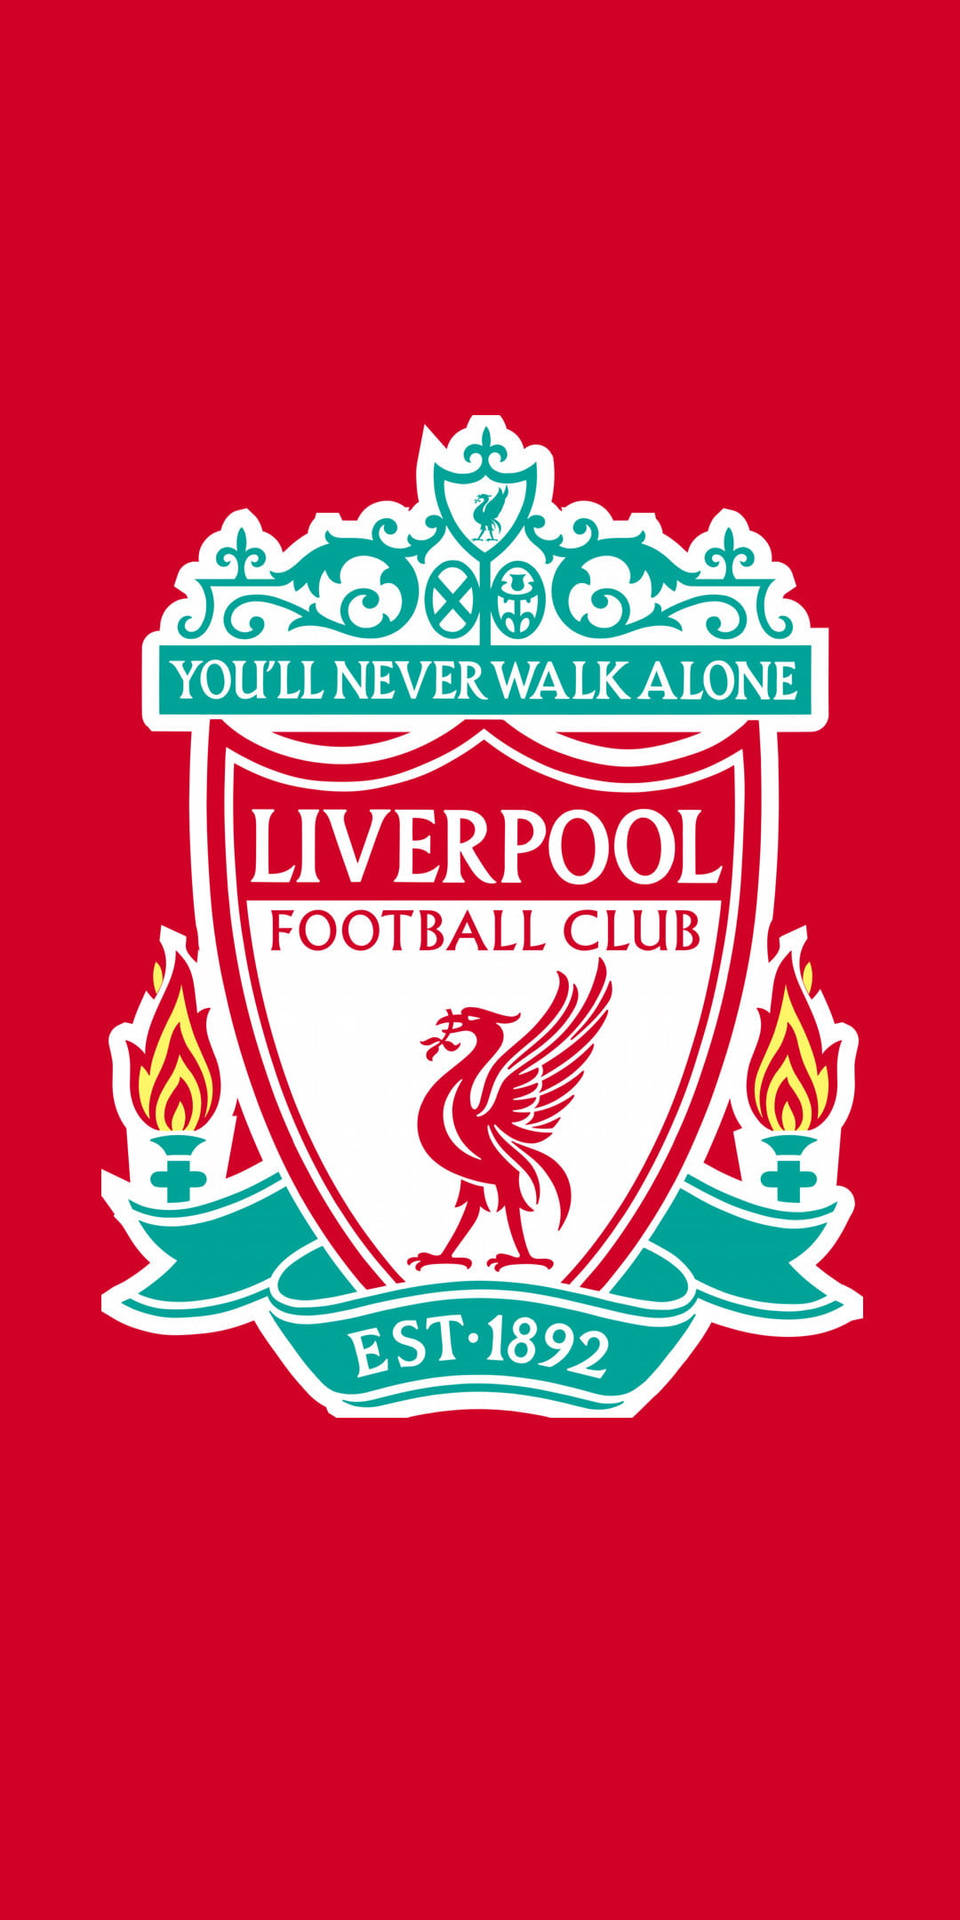 10 Facts You Didn't Know About Liverpool Football Club – Love The Game